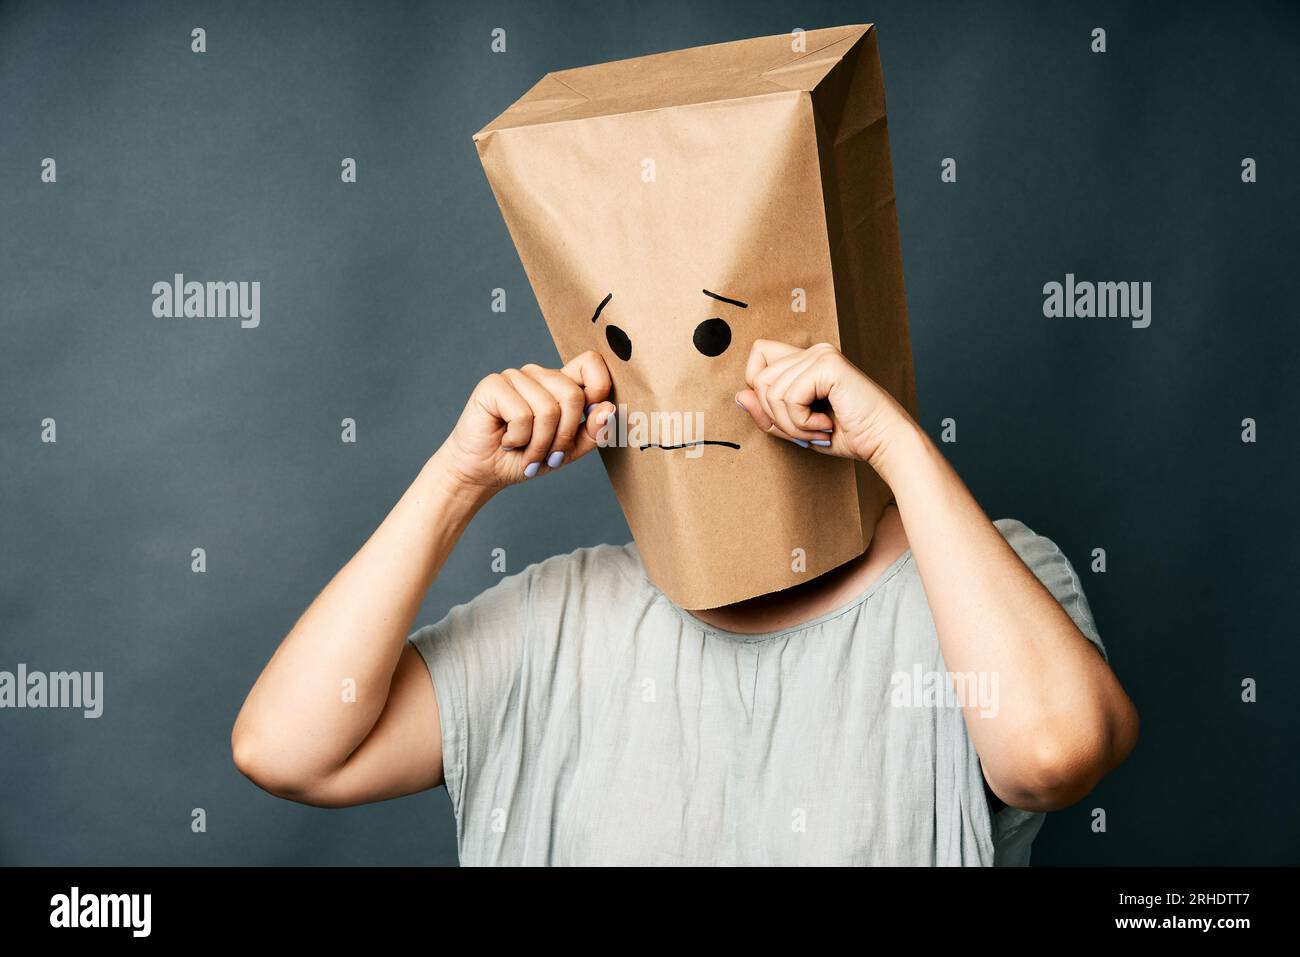 Upset crying woman with a paper bag on head over gray background. Emotion concept Stock Photo